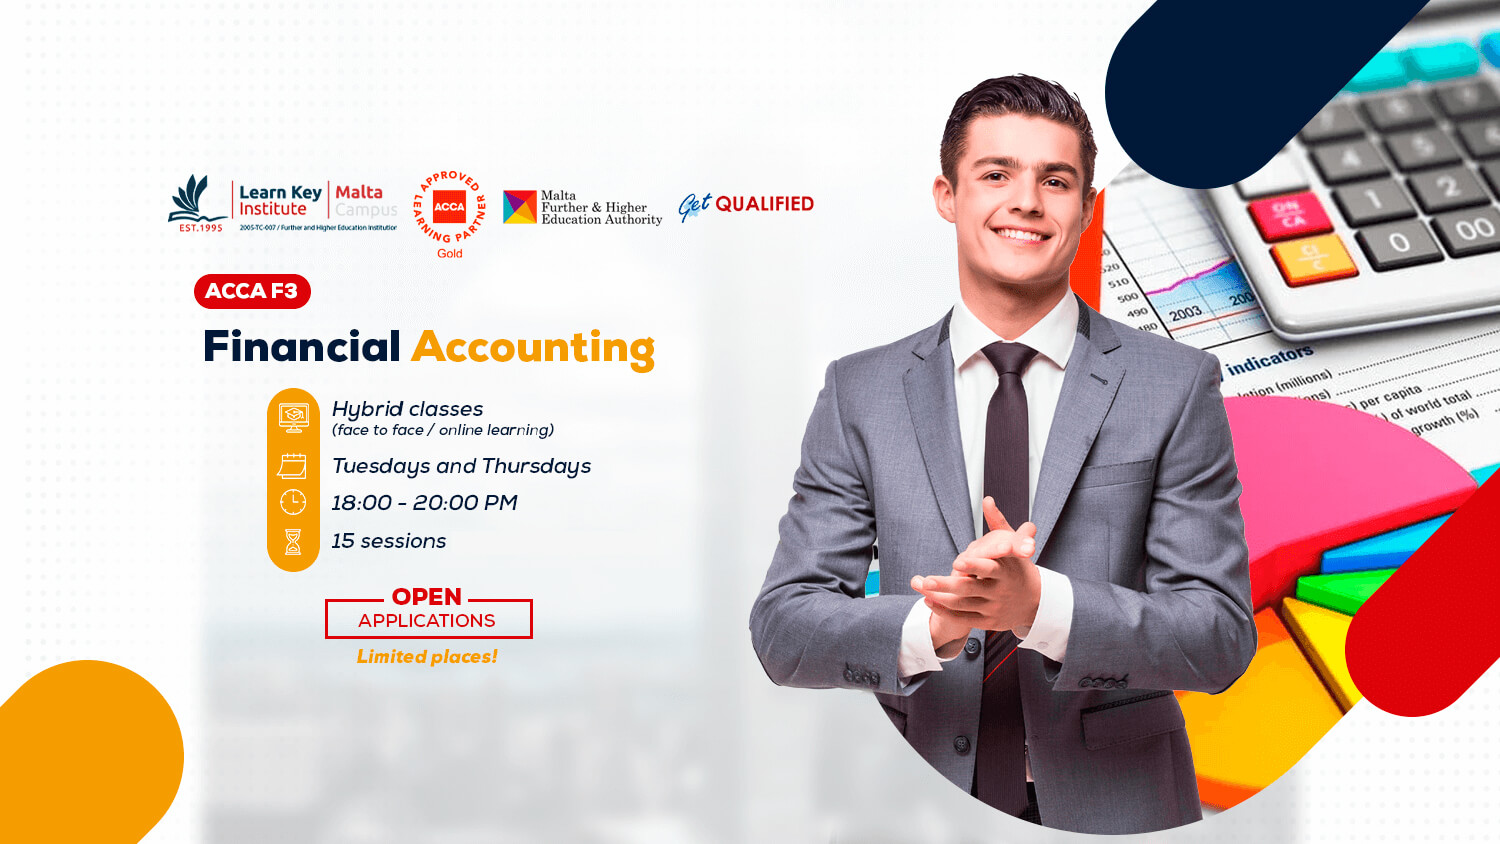 ACCA F3 - Financial Accounting